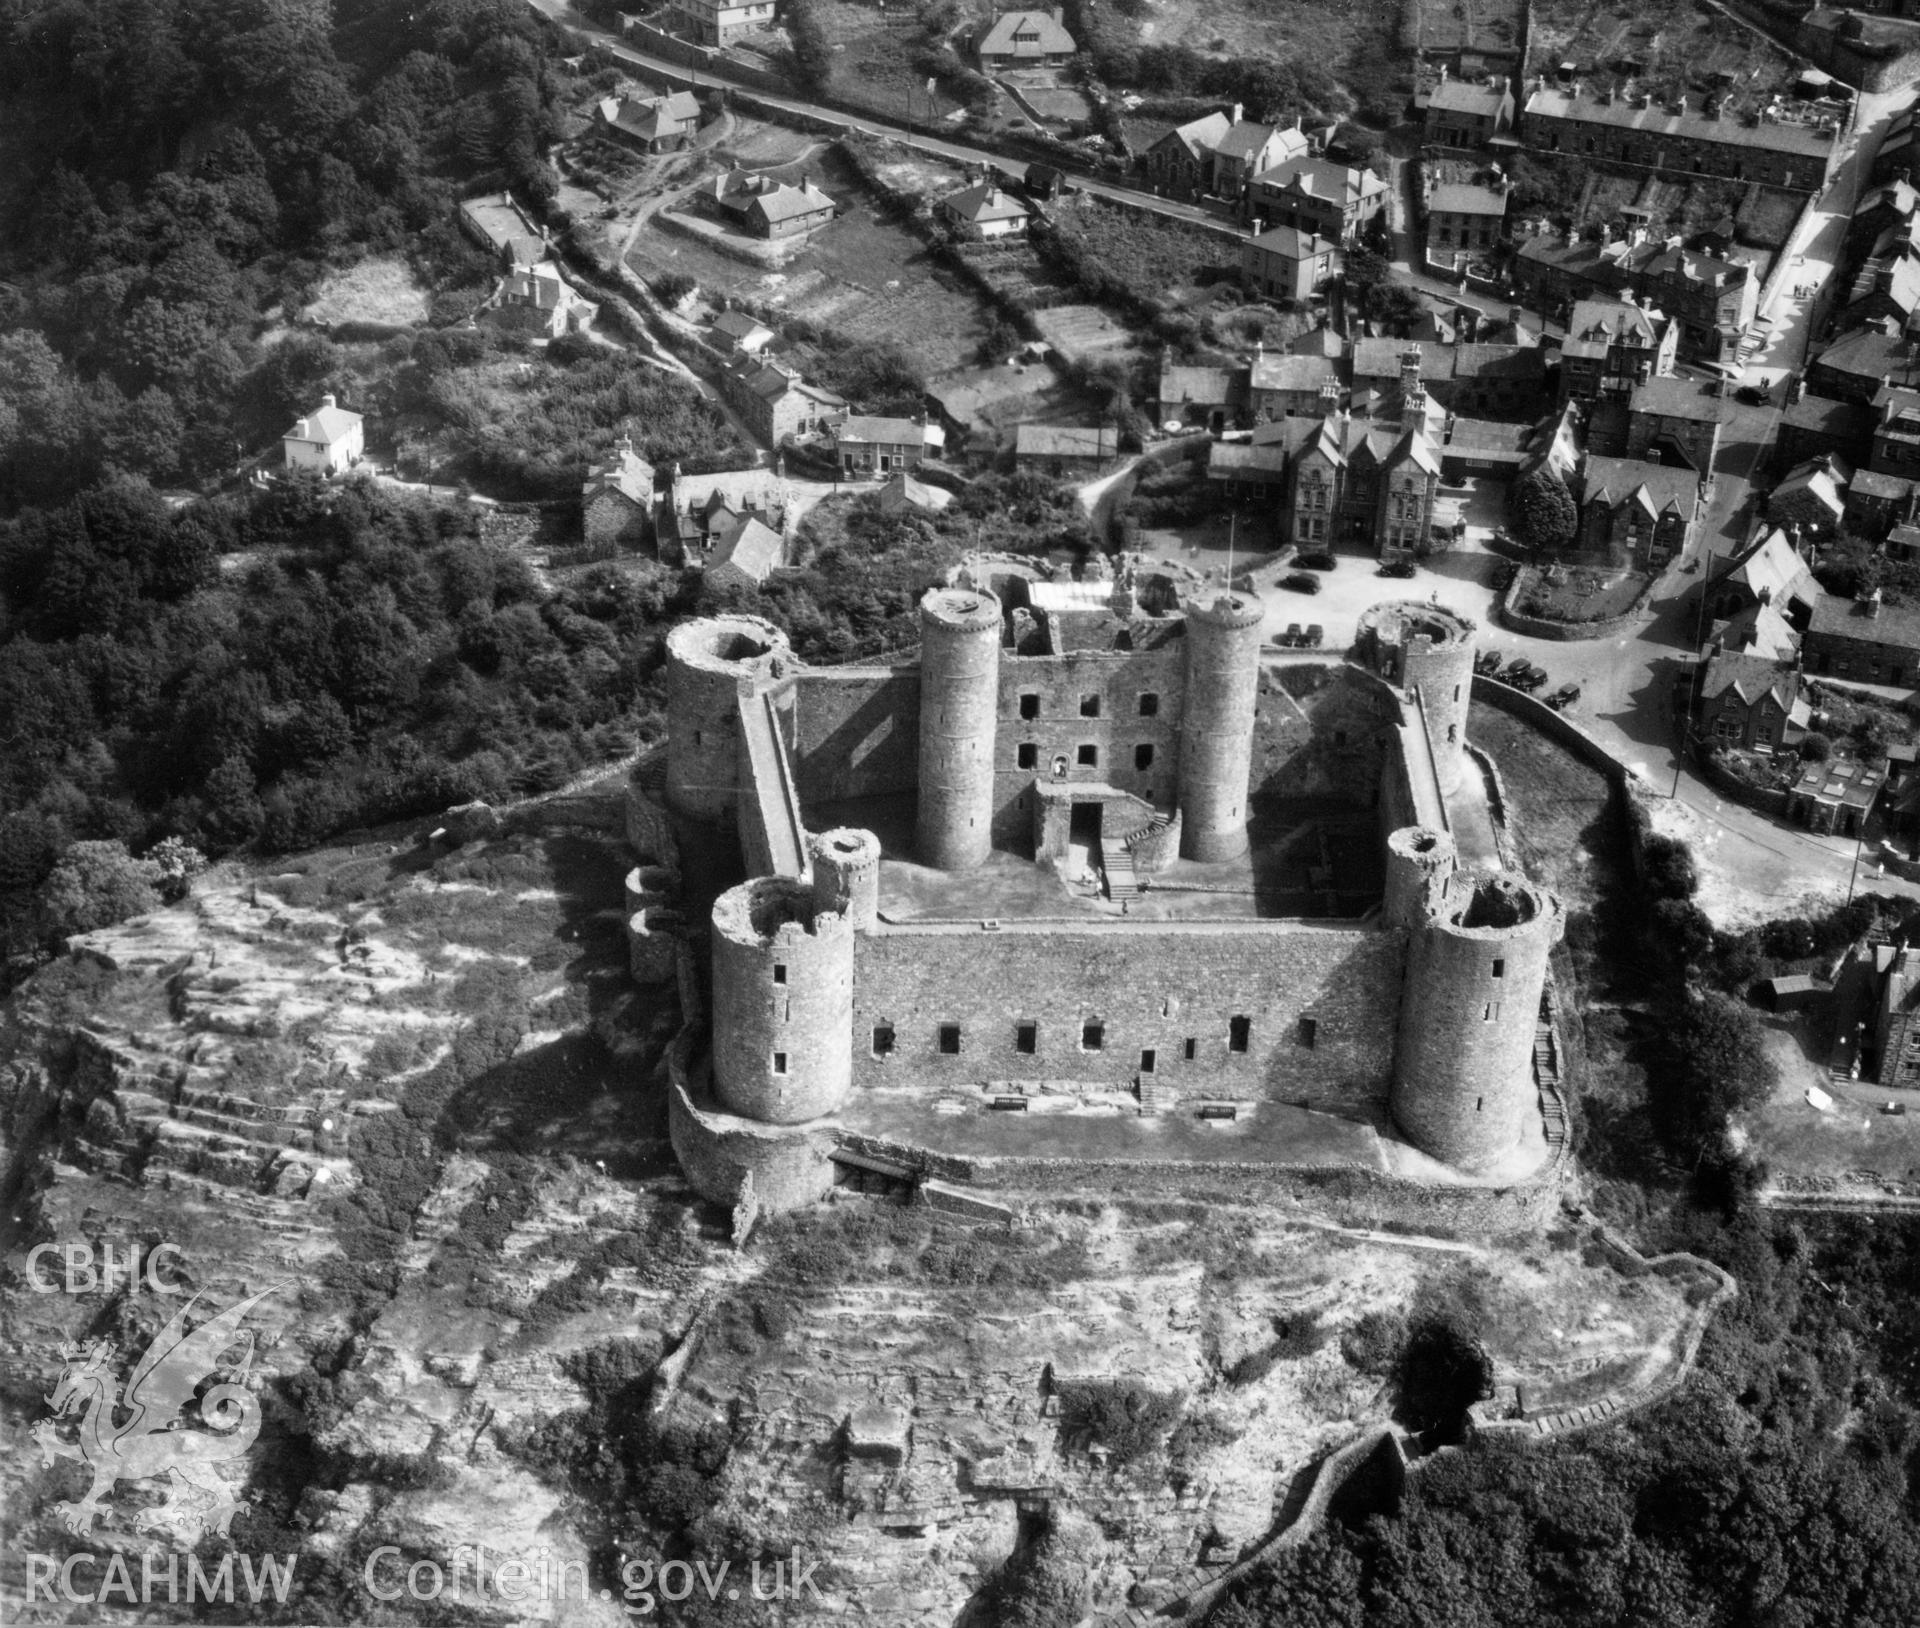 View of Harlech showing castle. Oblique aerial photograph, 5?" cut roll film.